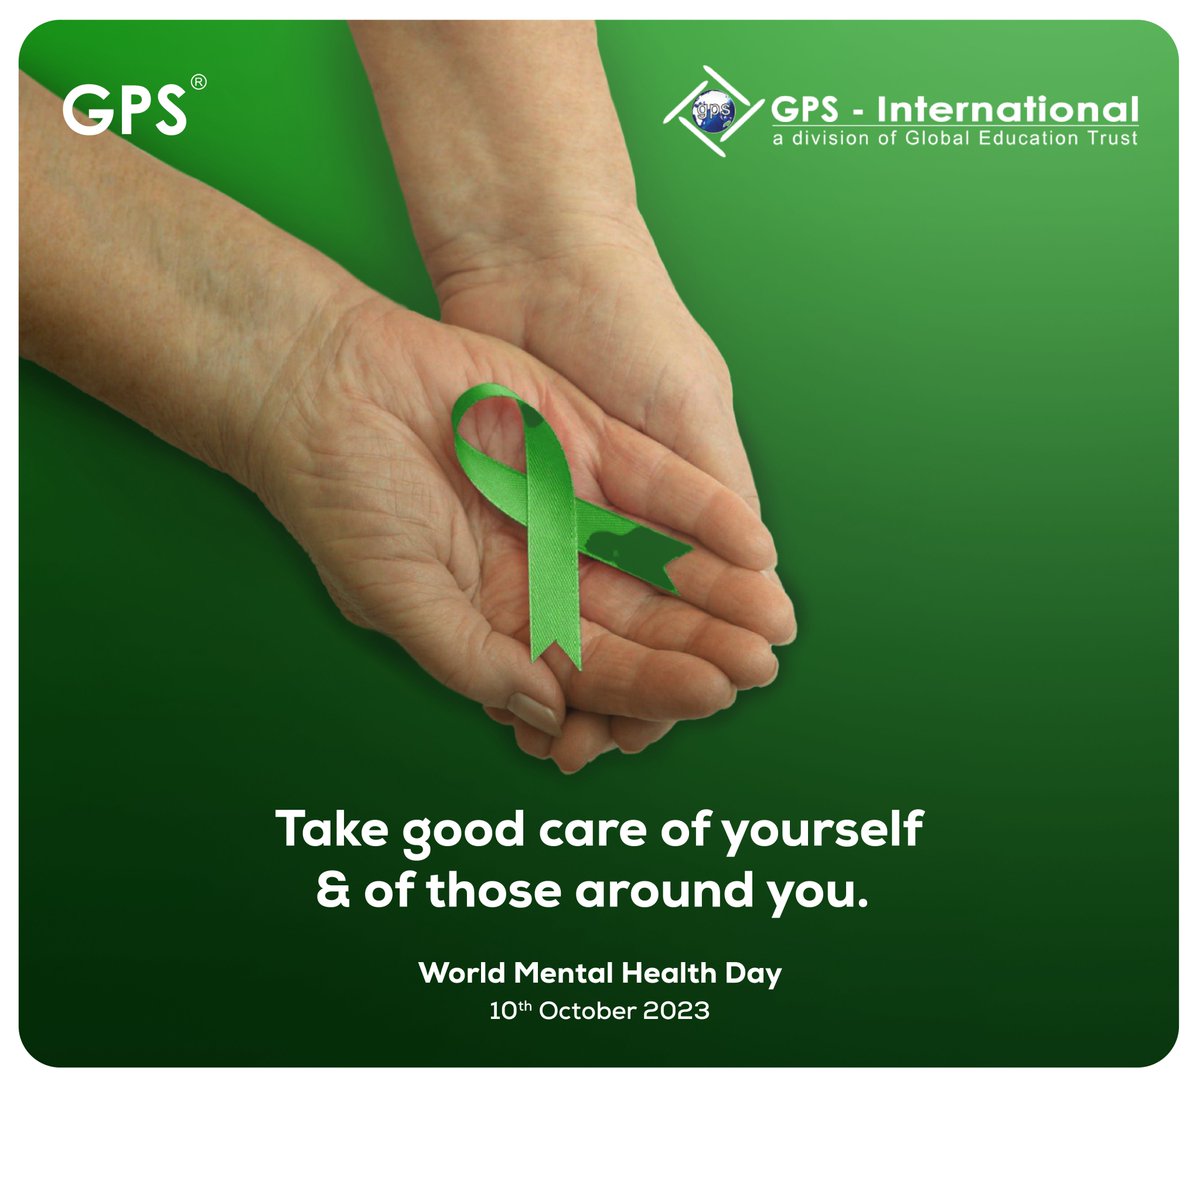 On World Mental Health Day, let’s pledge to be kinder to ourselves and others.

#worldmentalhealthday #mentalhealthawareness #health #awareness #internationalschool #globalschools #gpsinternational